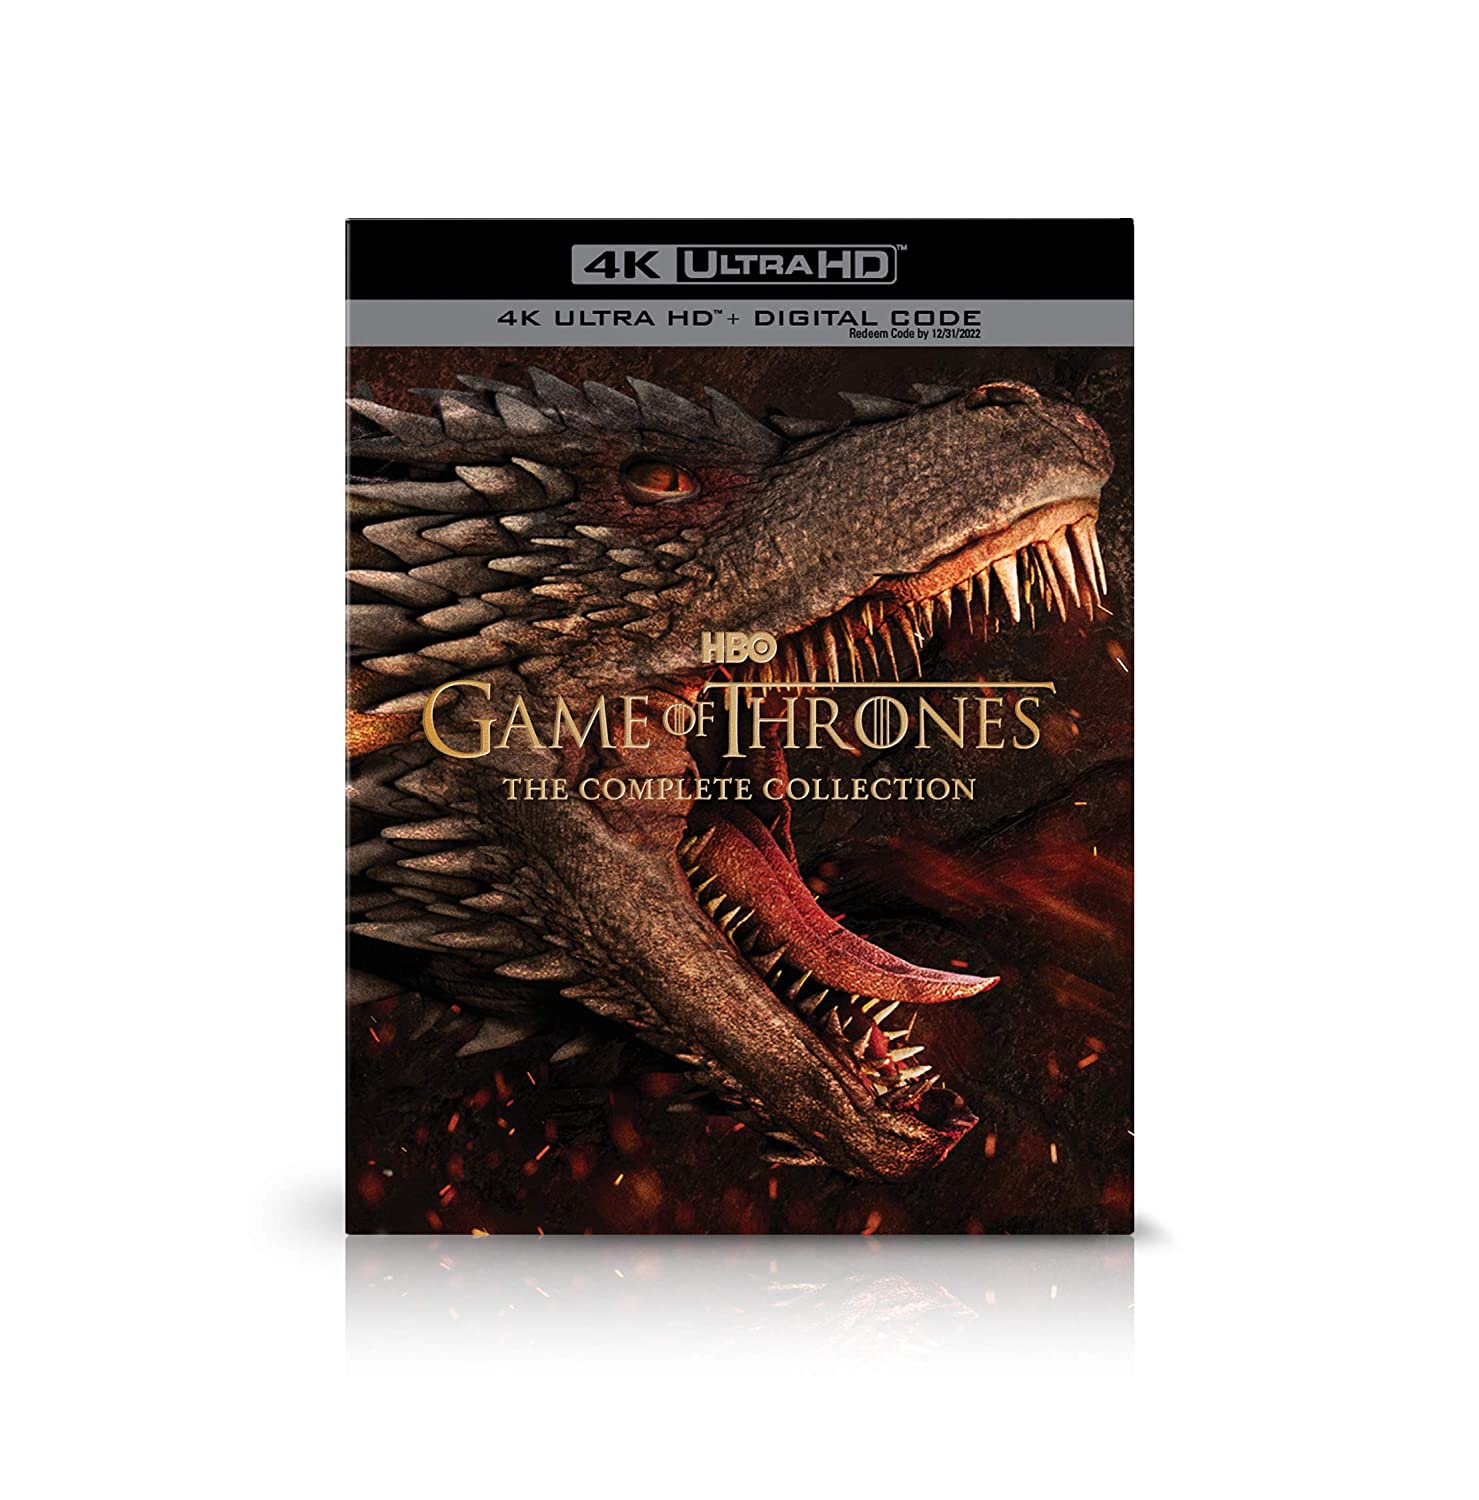 Game of Thrones: Complete Series (Blu-ray)